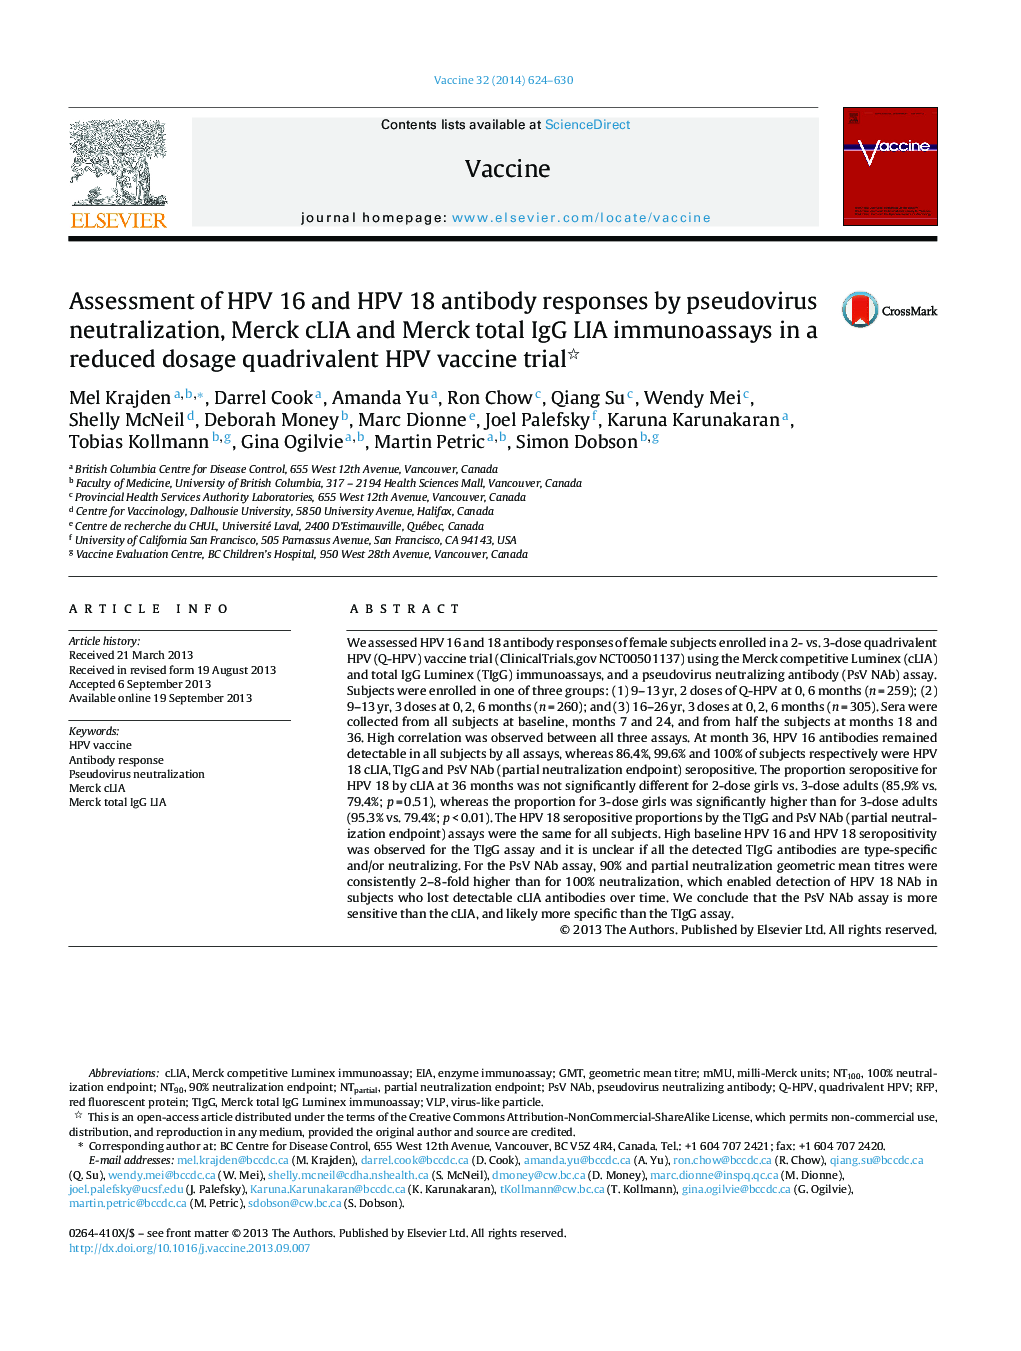 Assessment of HPV 16 and HPV 18 antibody responses by pseudovirus neutralization, Merck cLIA and Merck total IgG LIA immunoassays in a reduced dosage quadrivalent HPV vaccine trial